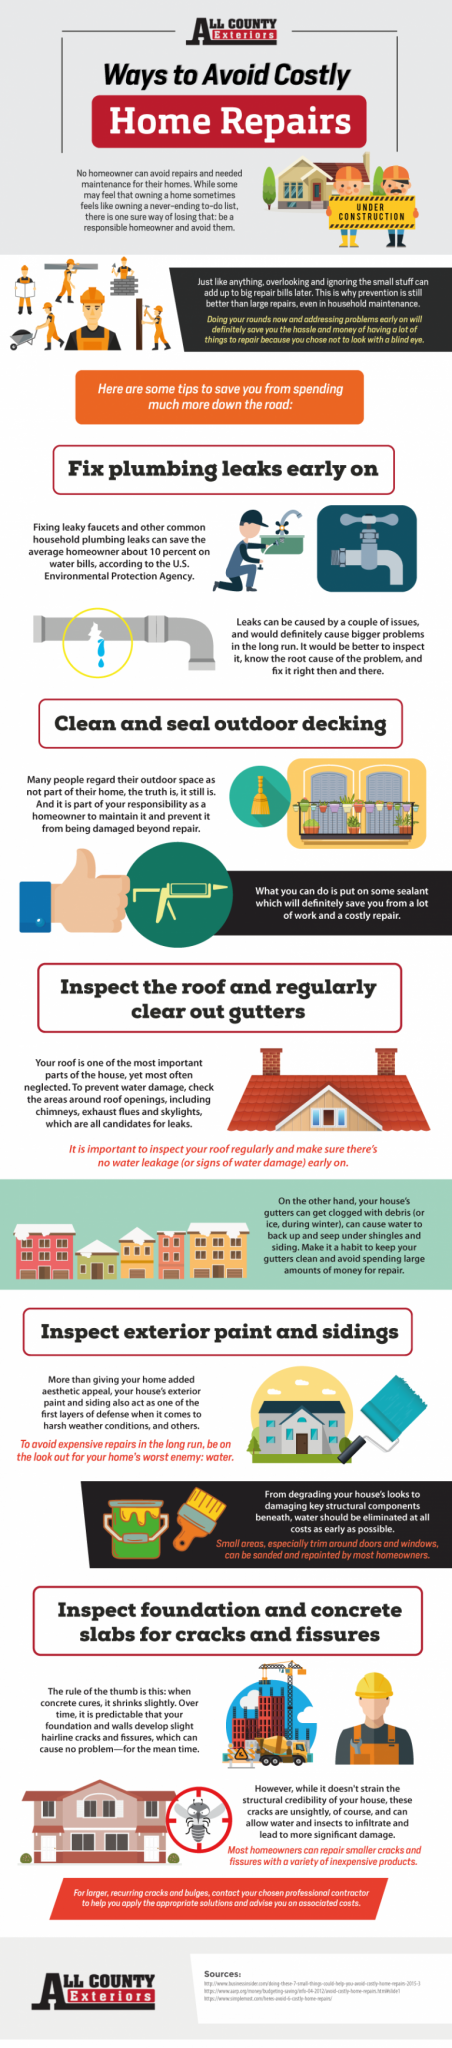 Ways-to-Avoid-Costly-Home-Repairs